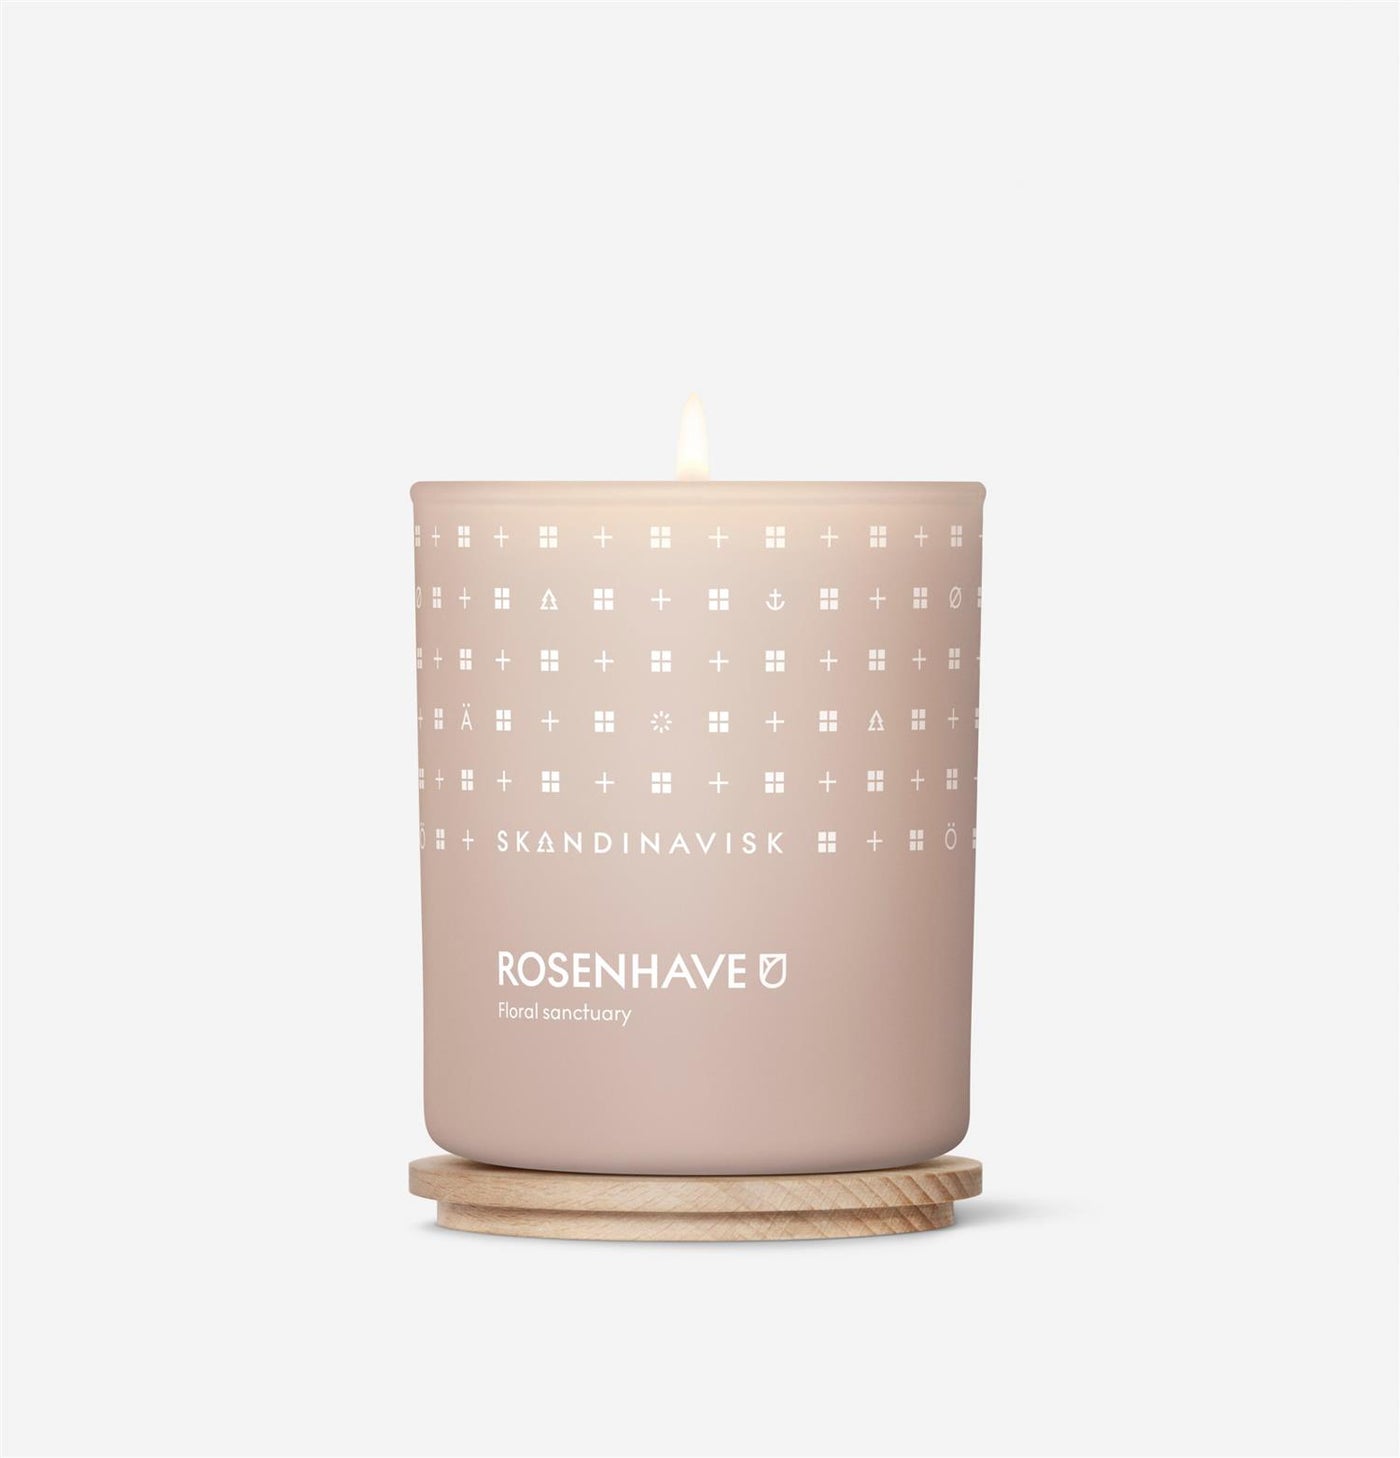 ROSENHAVE 200g Scented Candle